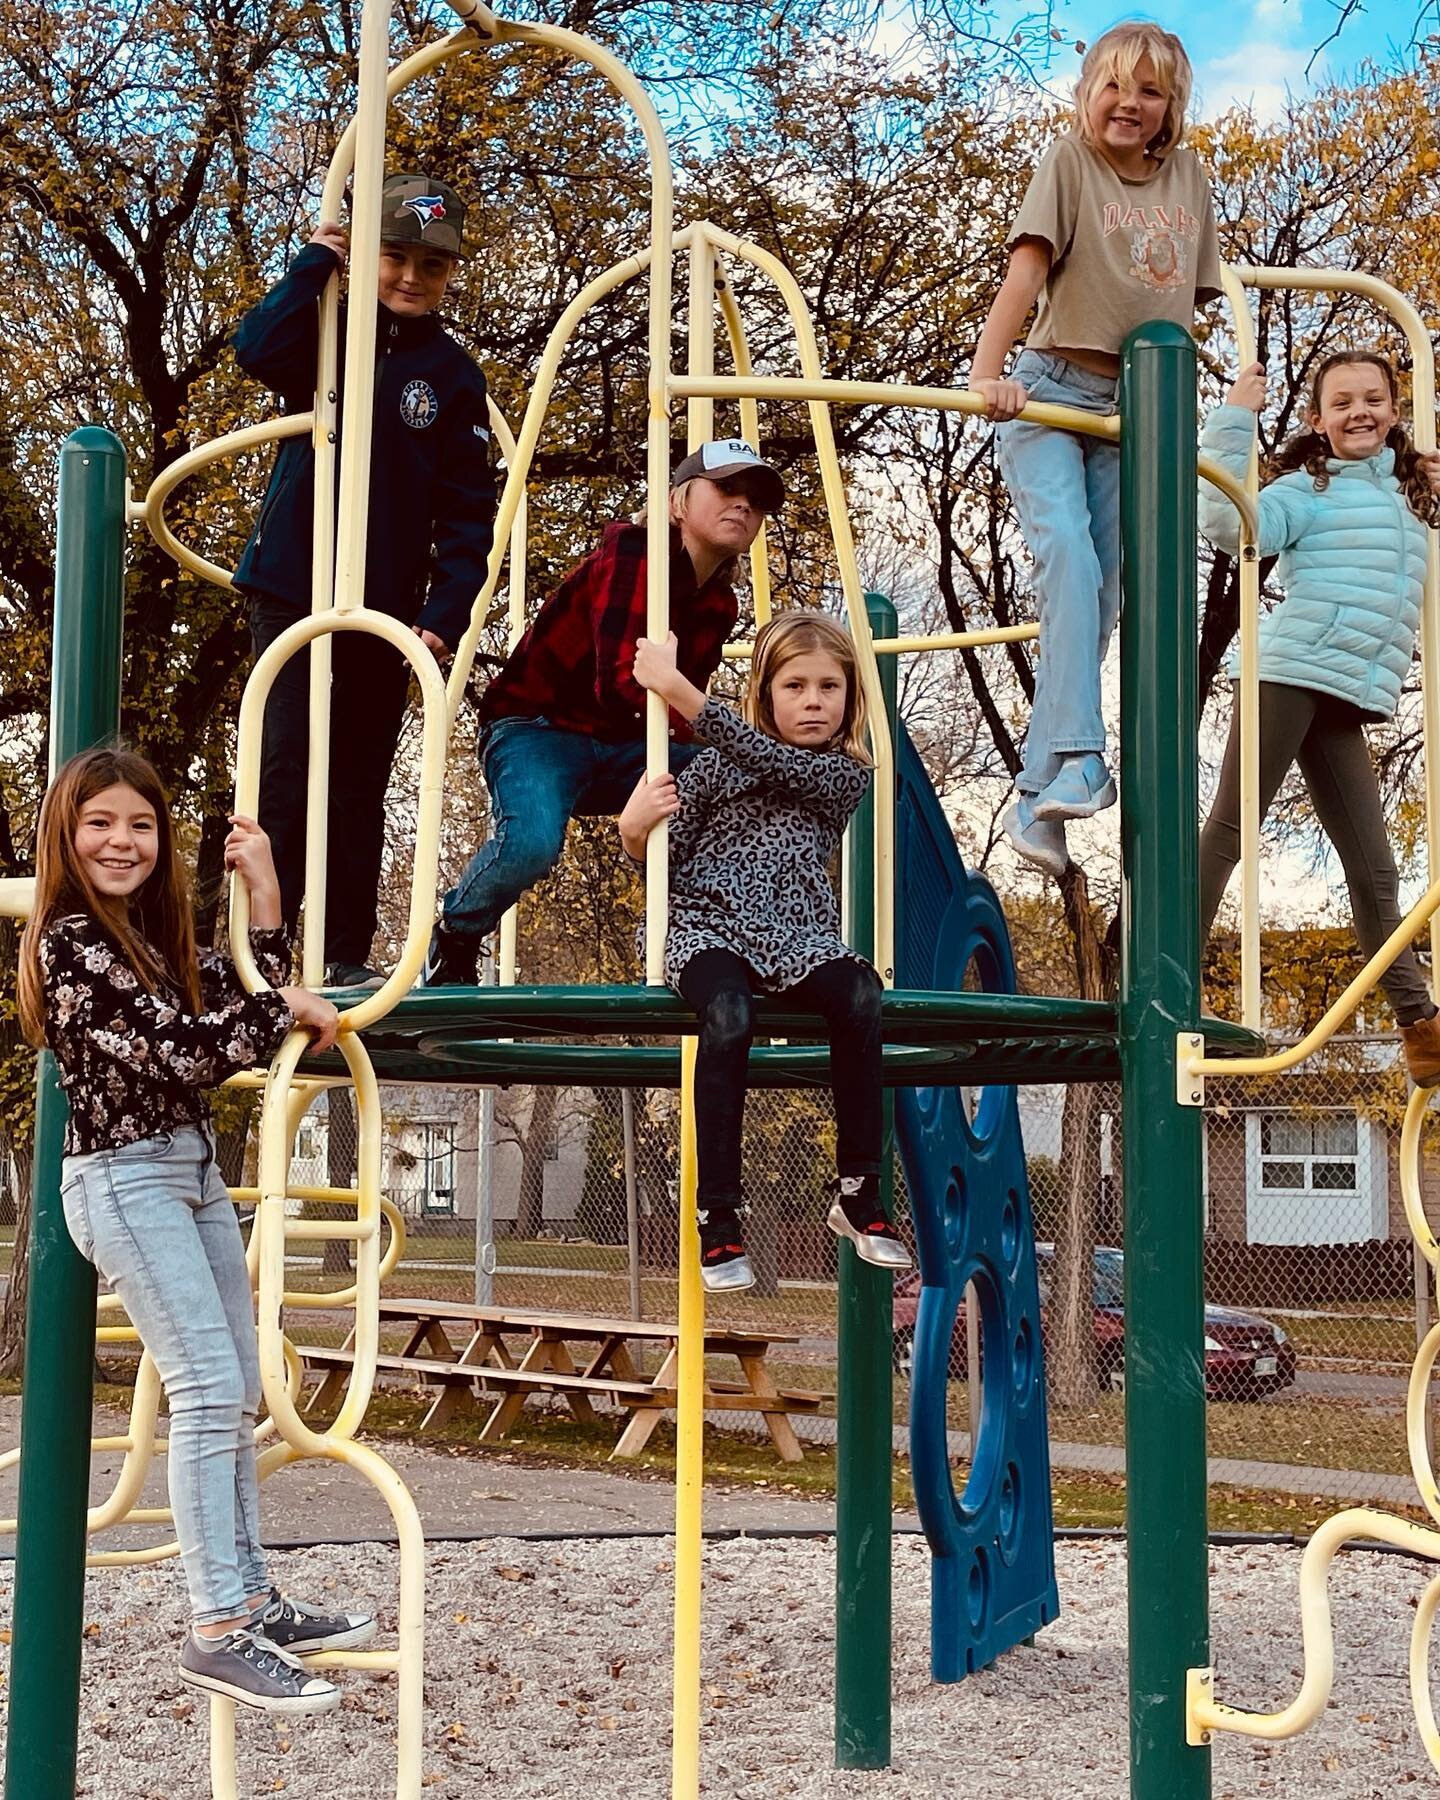 Happy Thanksgiving everyone! 🧡

Bonne action de gr&acirc;ce &agrave;  tous! 🍁

We got to celebrate yesterday with the family and took a walk to the park. 🌿

Proud Aunty to these little munchkins, who are no longer little! 😘 Une fi&egrave;re matan